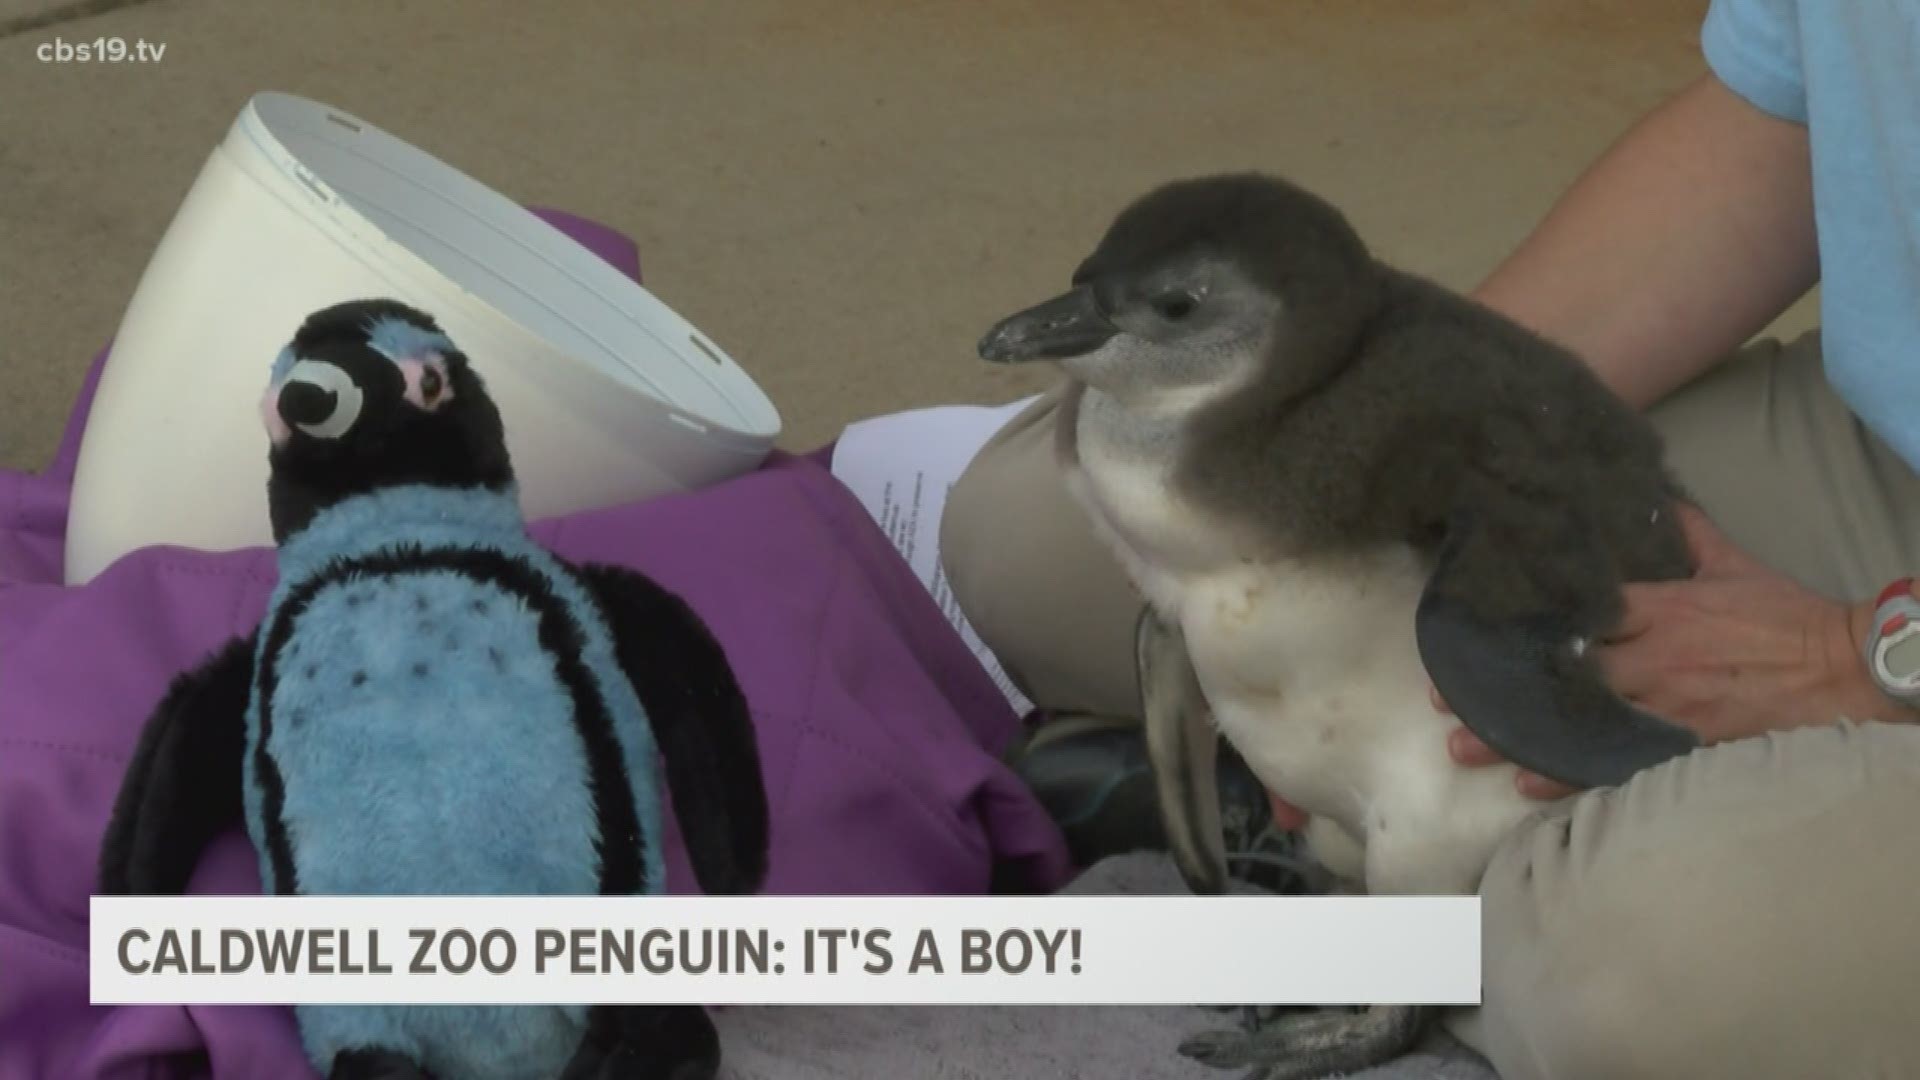 The zoo is holding a contest to name the penguin. The winning name will be announced on May 4.